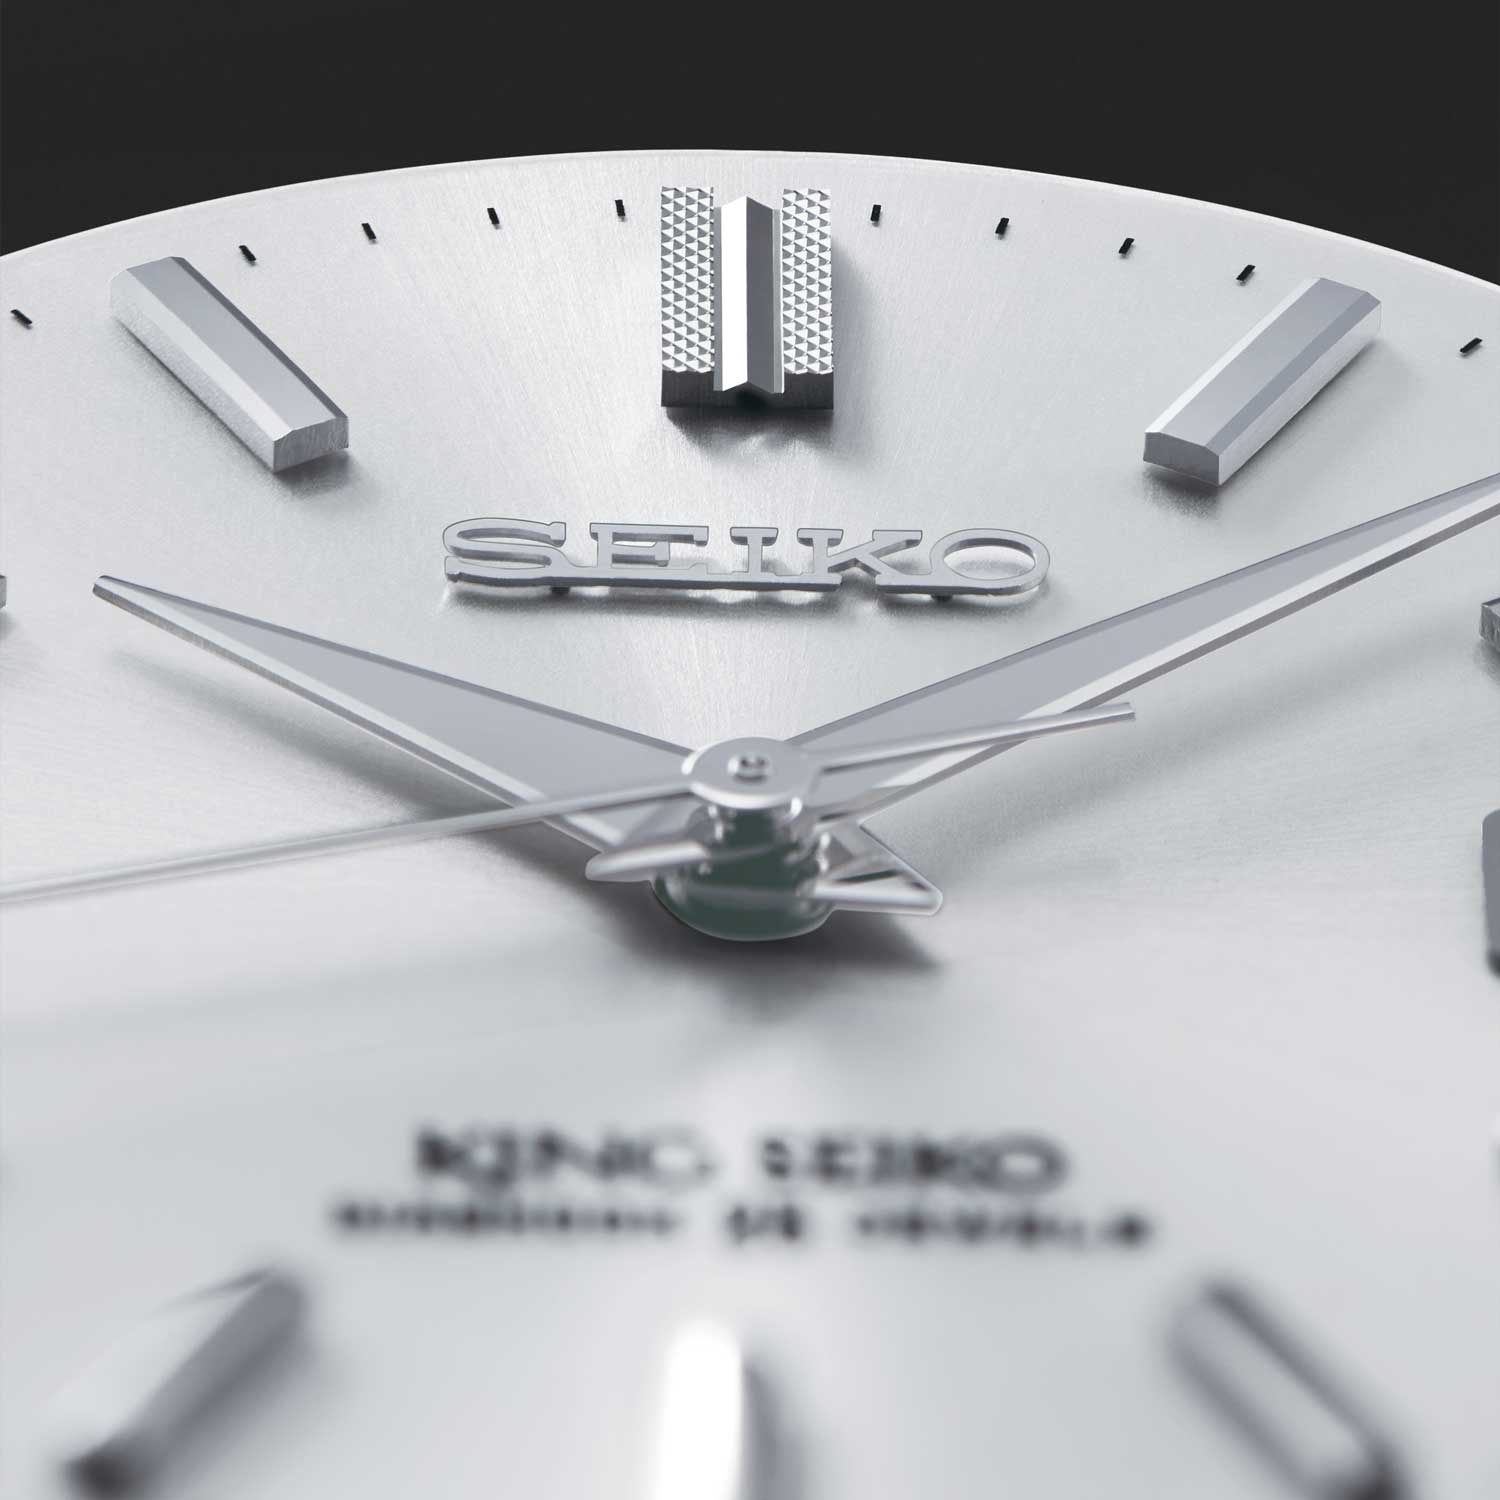 Introducing the Seiko 140th Anniversary Limited Edition Re-c - Revolution